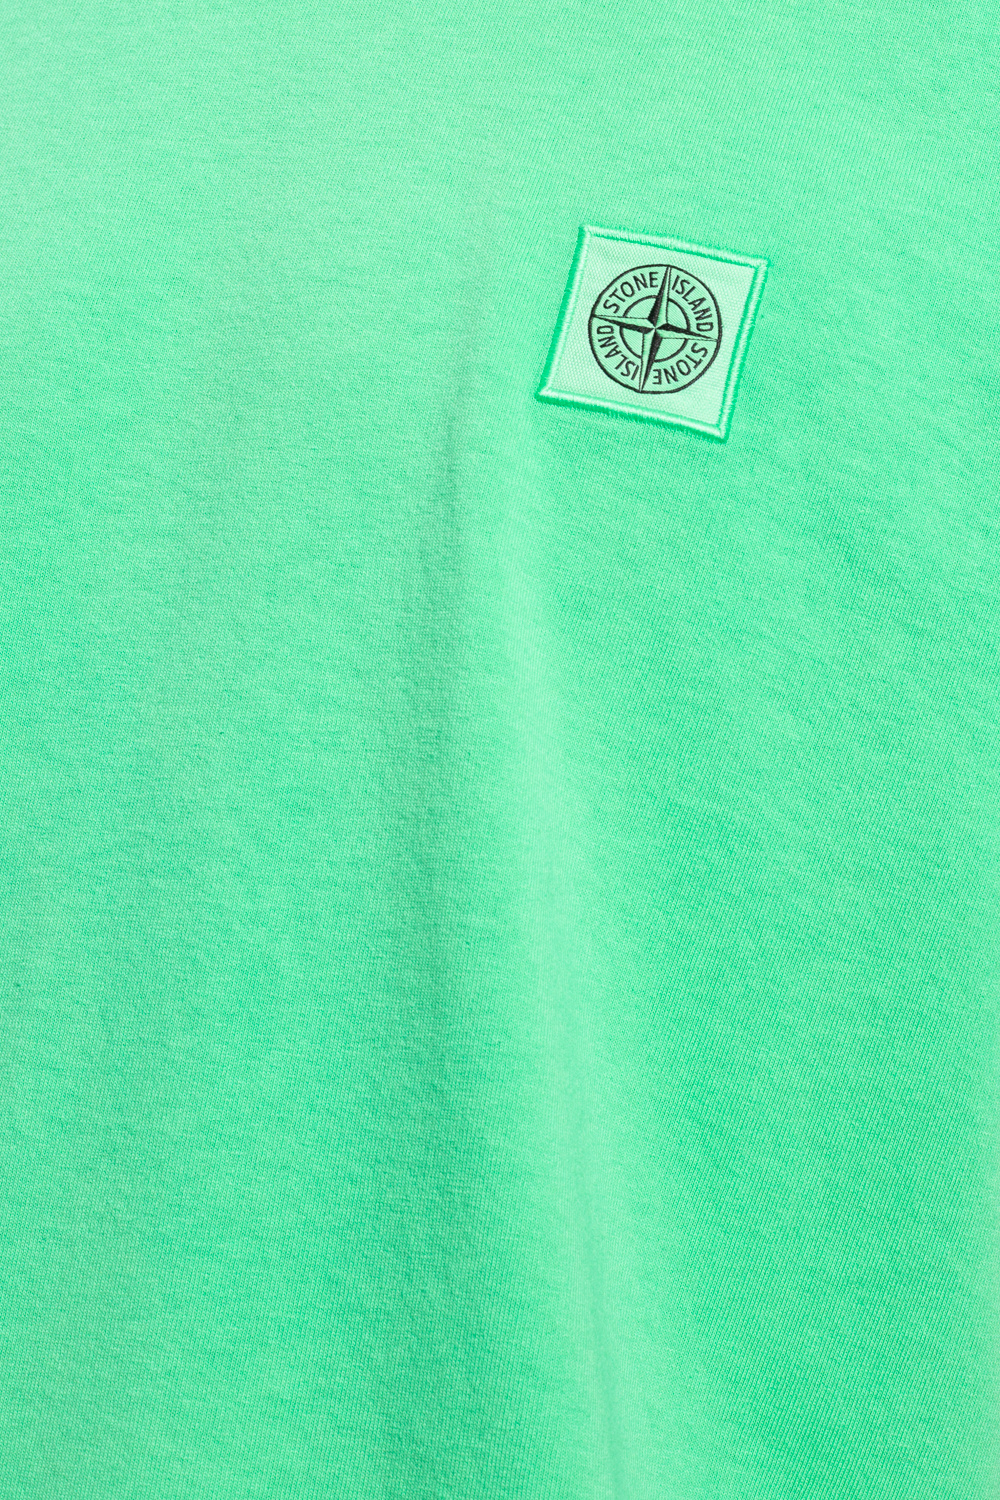 Stone Island Morning Star Pullover Sweatshirt is all you will need on a breezy day